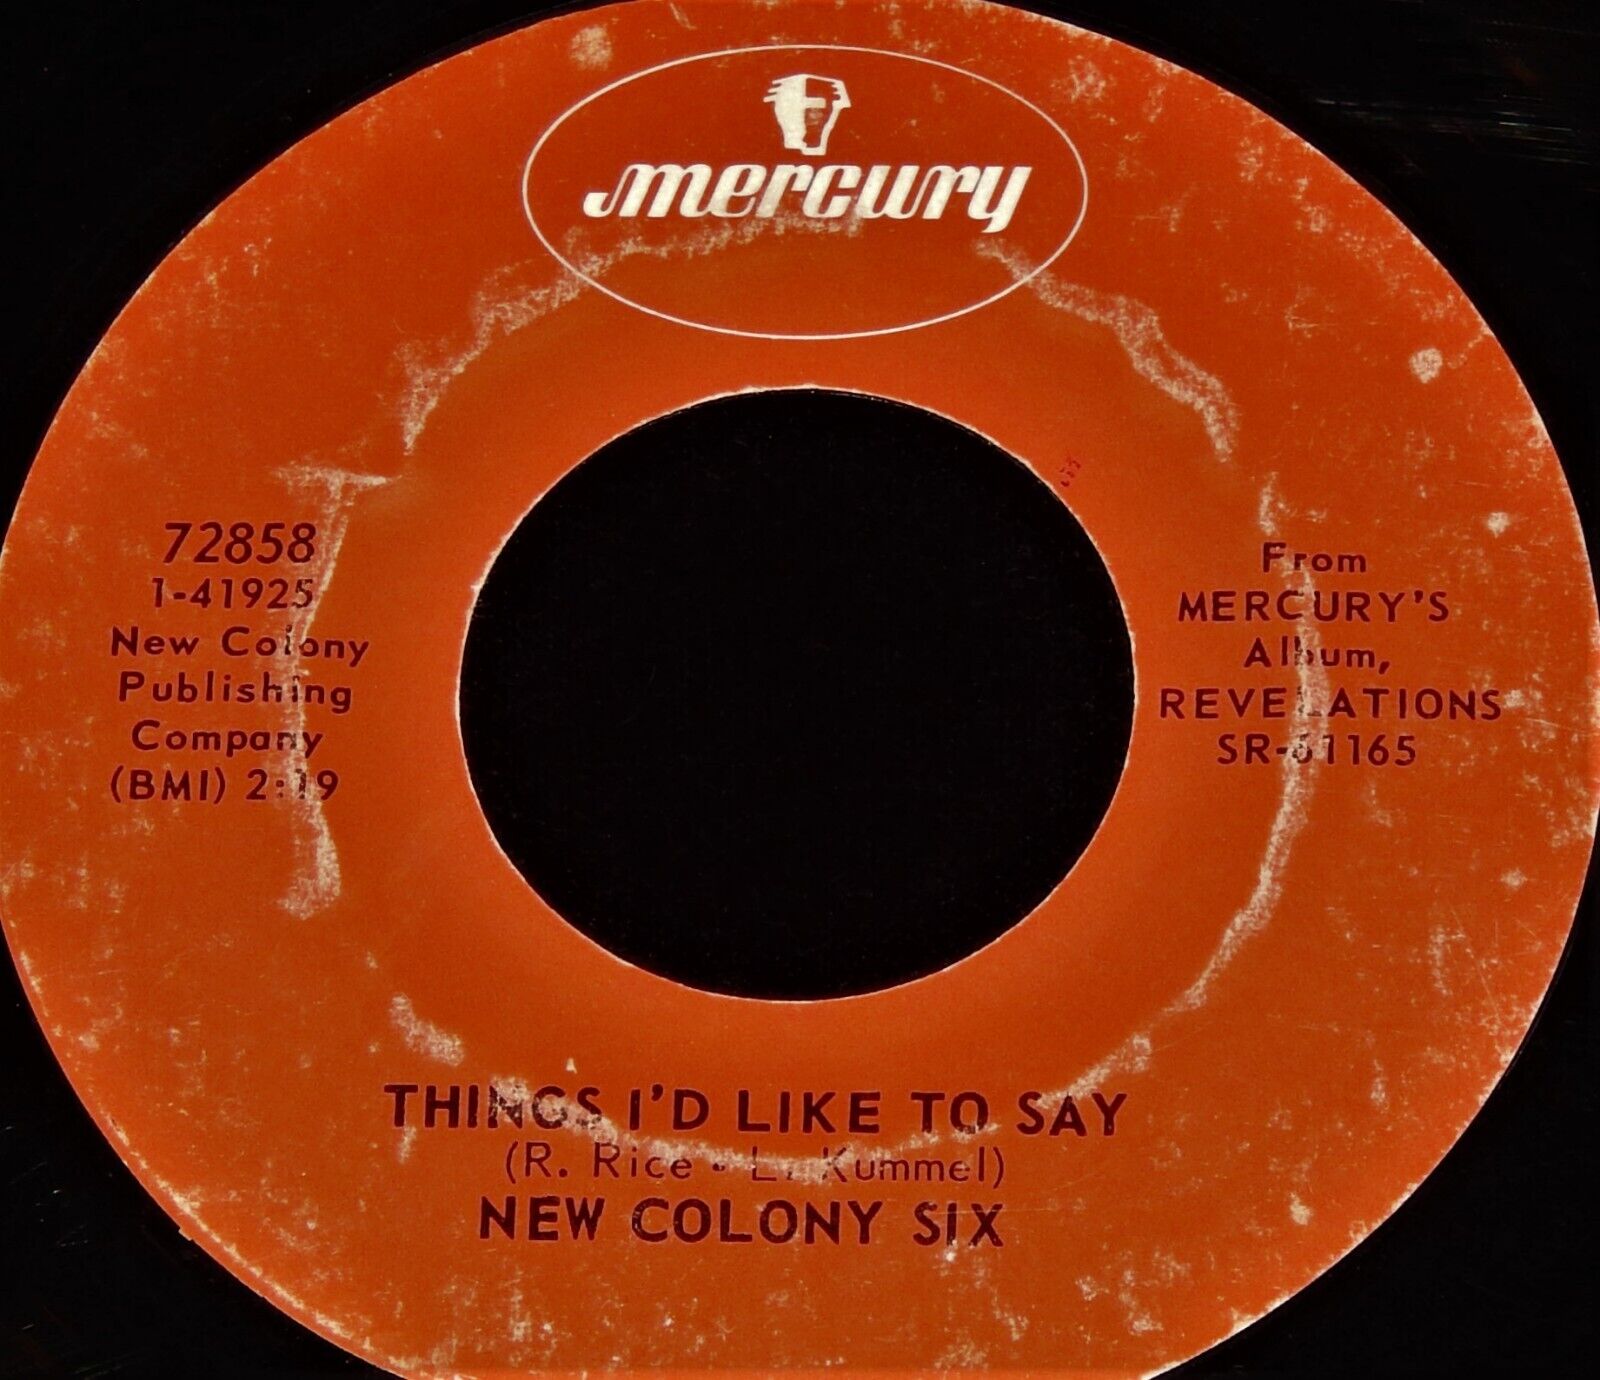 Vintage Record, NEW COLONY SIX: THINGS I'D LIKE TO SAY, 45 rpm, 1968, Psych Rock